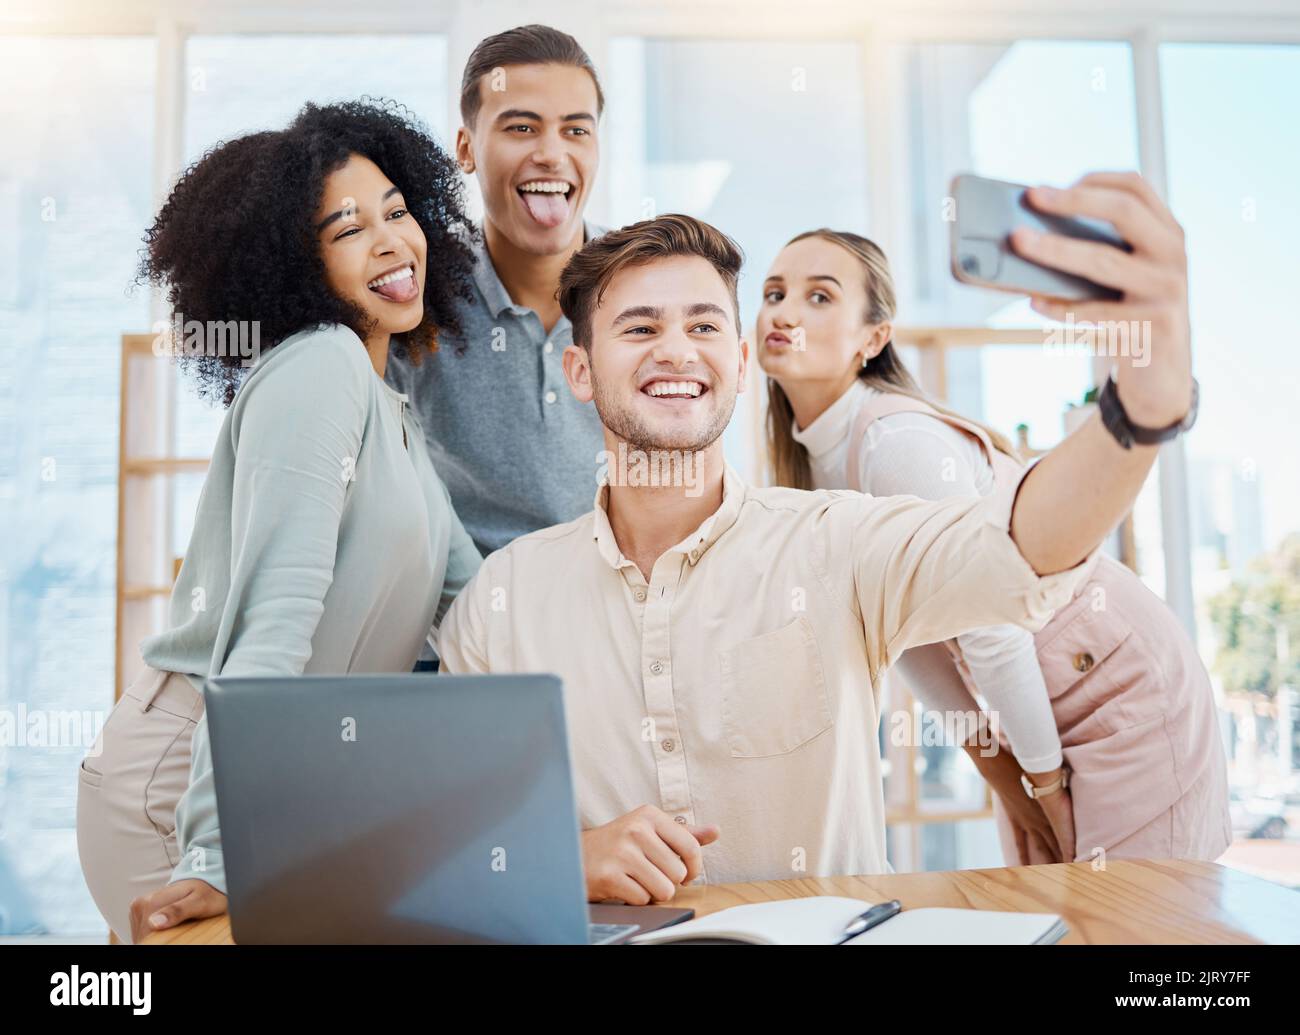 Office selfie with happy corporate colleagues having fun and being goof, silly face expressions while bonding. Young, diverse work friends relaxing on Stock Photo